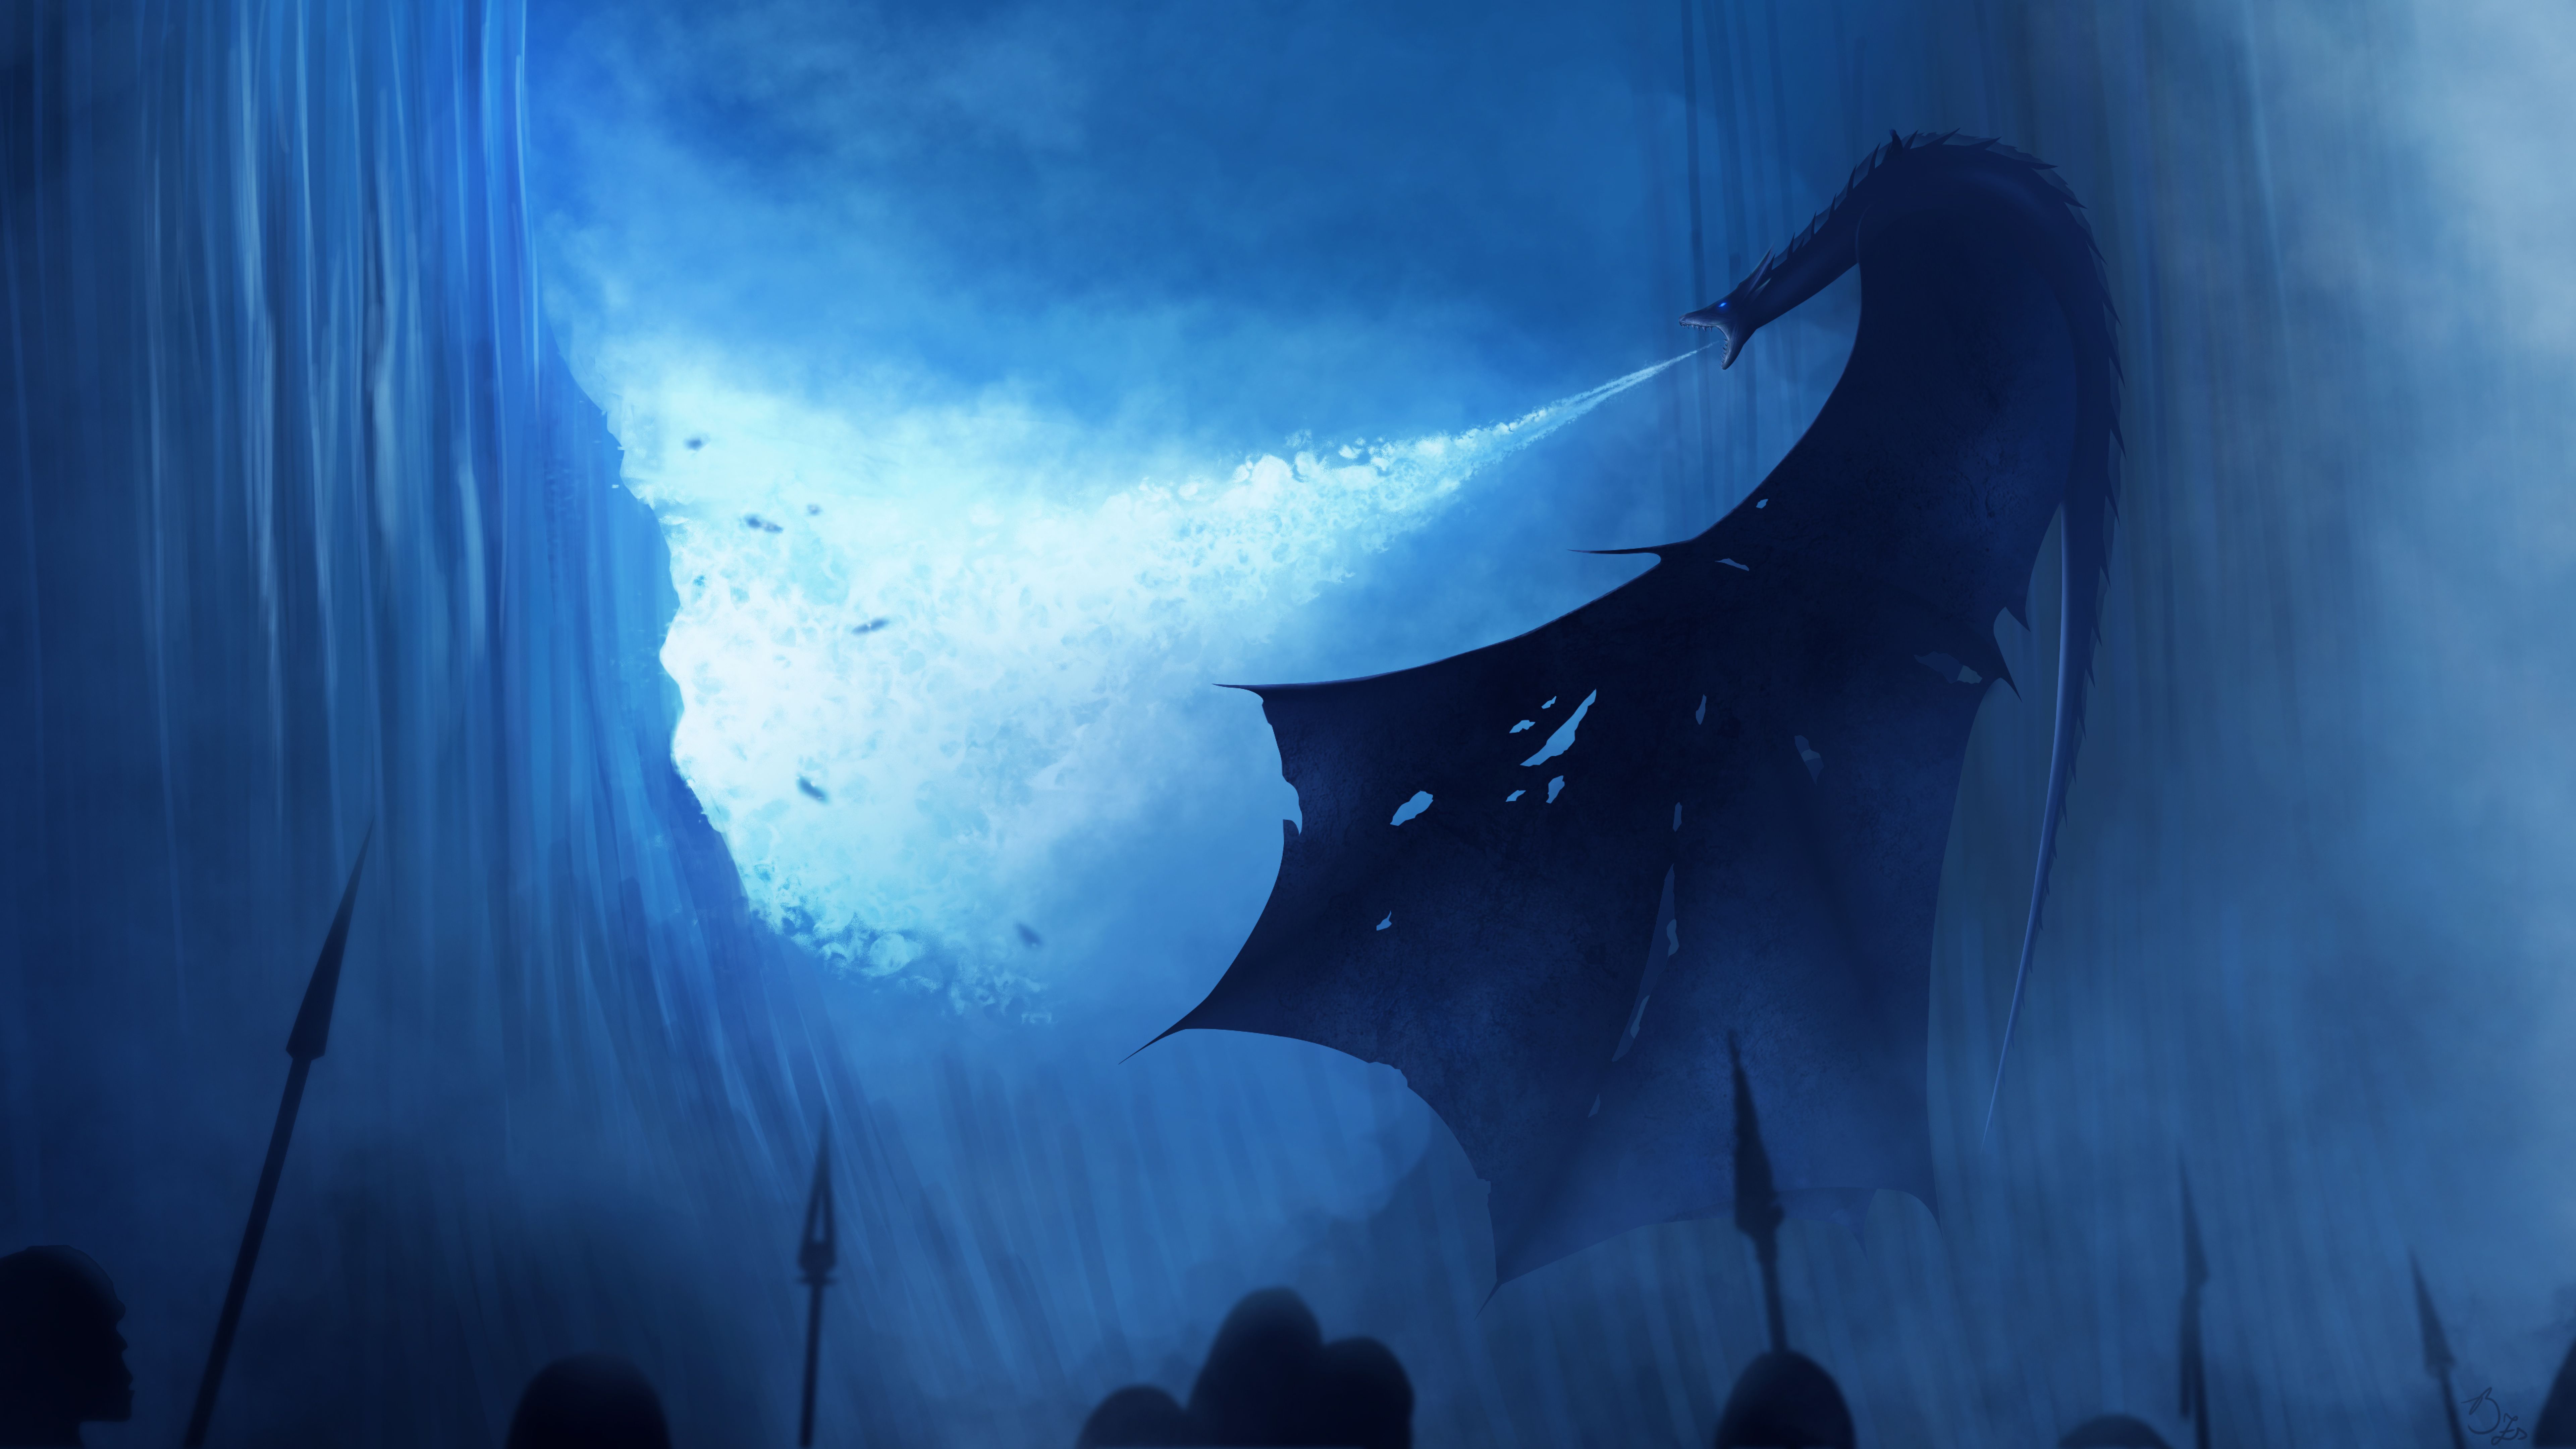 White Walker Ice Dragon Breaking The Wall 8K Wallpaper, HD Movies 4K Wallpaper, Image, Photo and Background